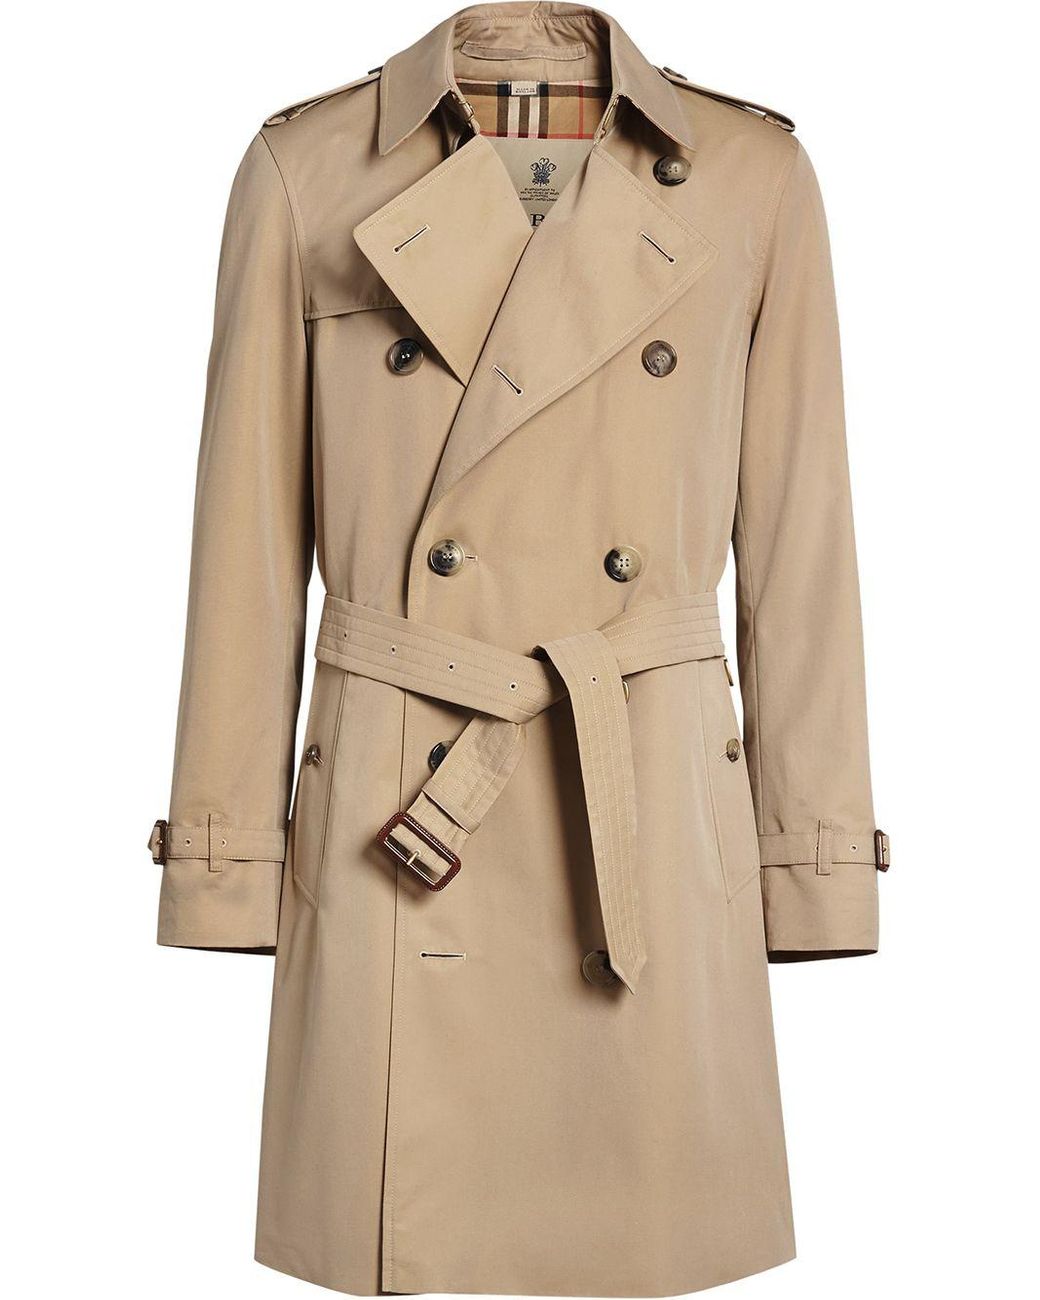 Burberry Chelsea Heritage Midi Trench Coat in Natural for Men - Lyst